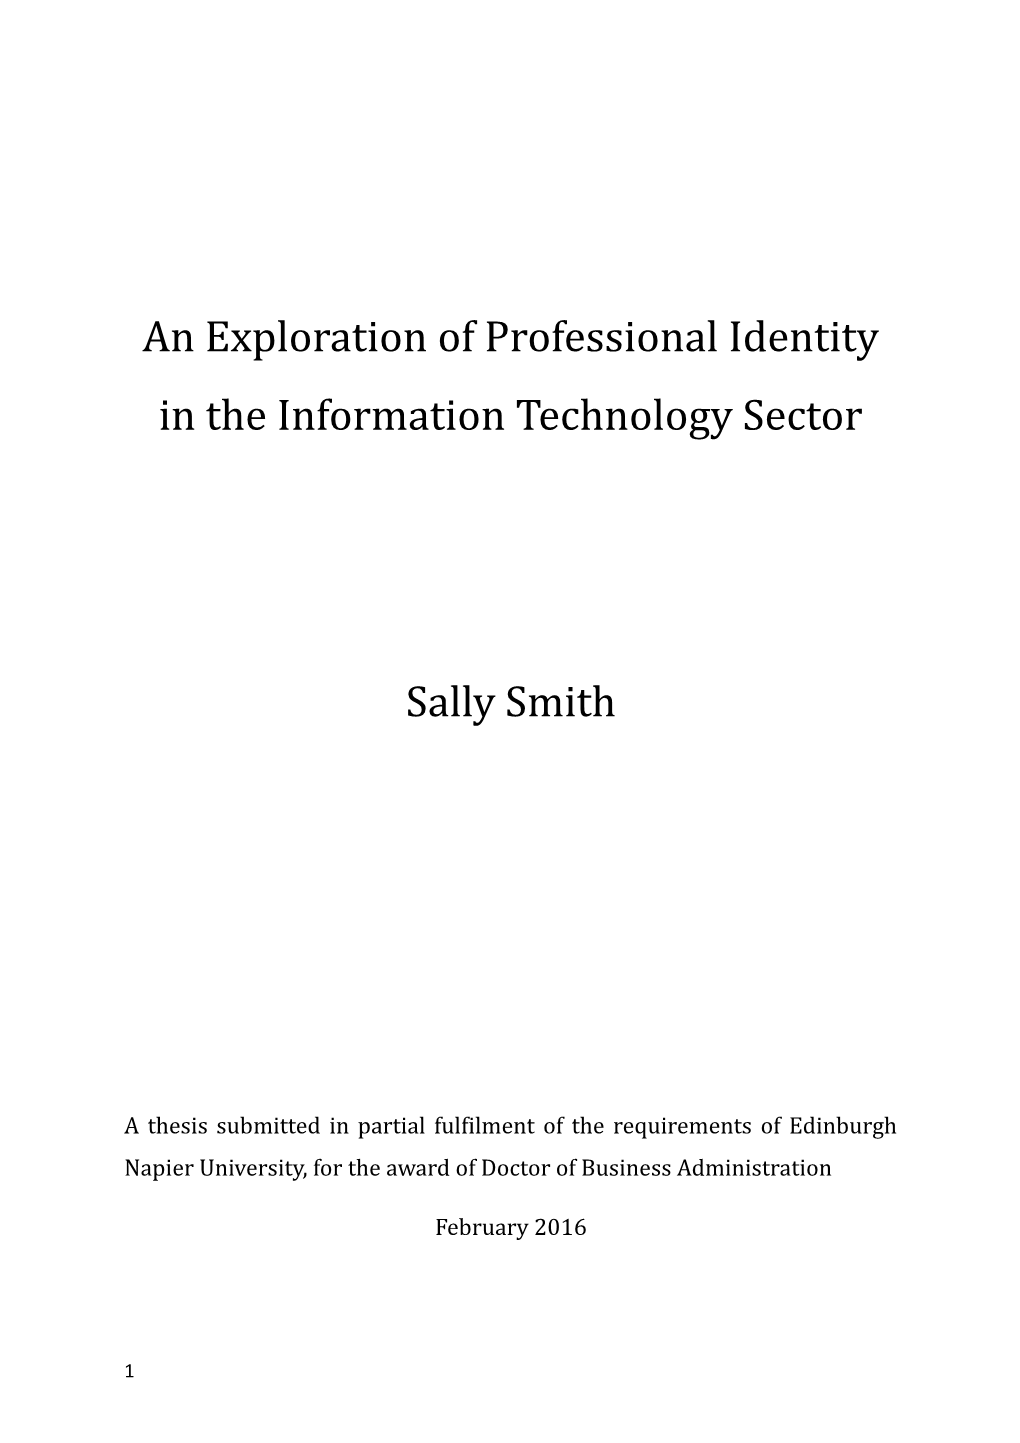 An Exploration of Professional Identity in the Information Technology Sector